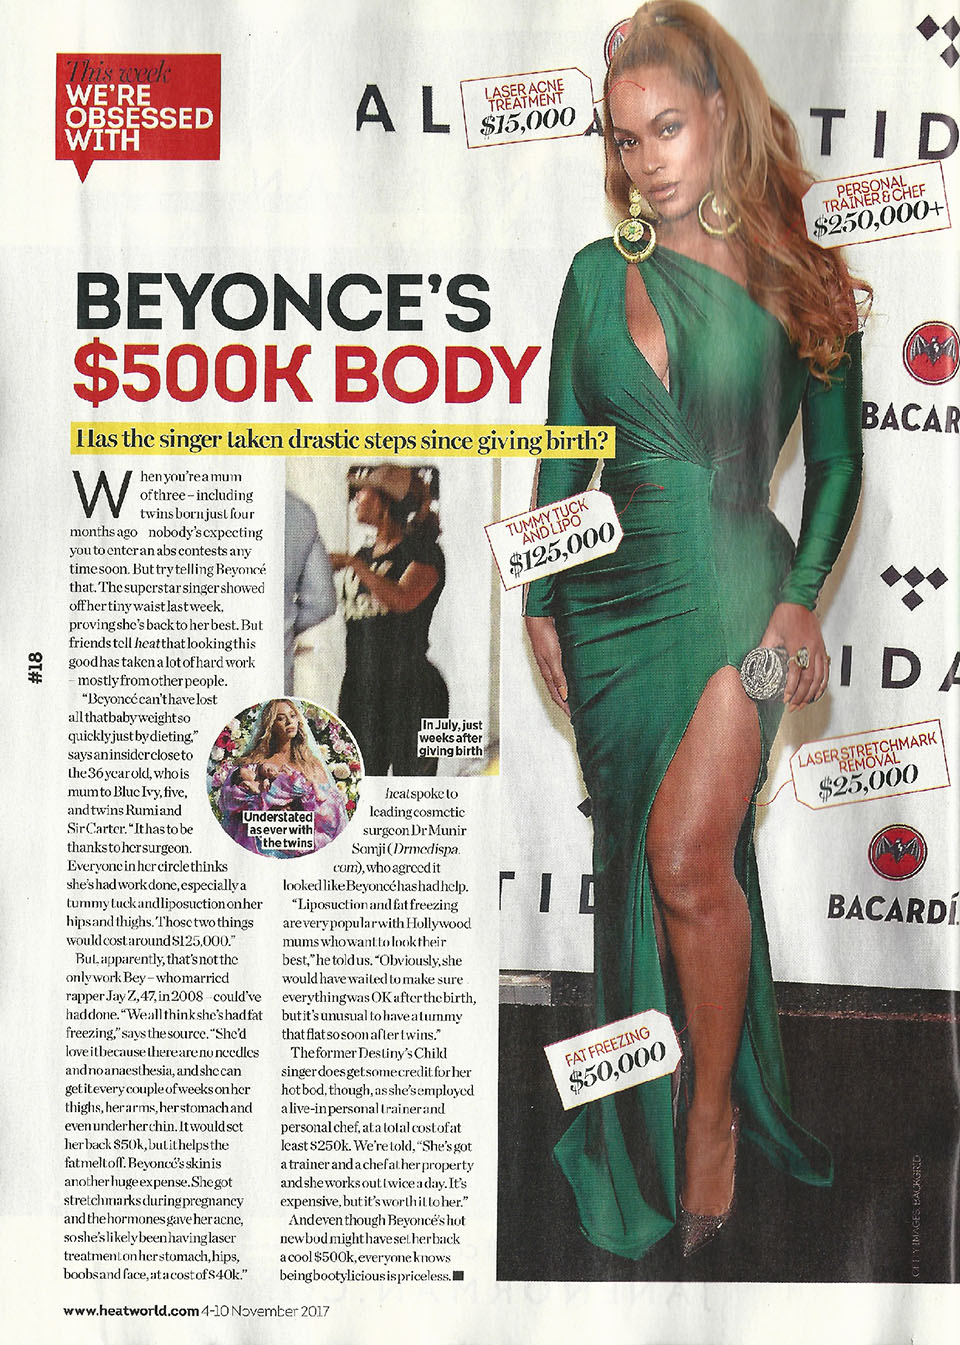 Dr Somji comments on Beyonce's $500K body